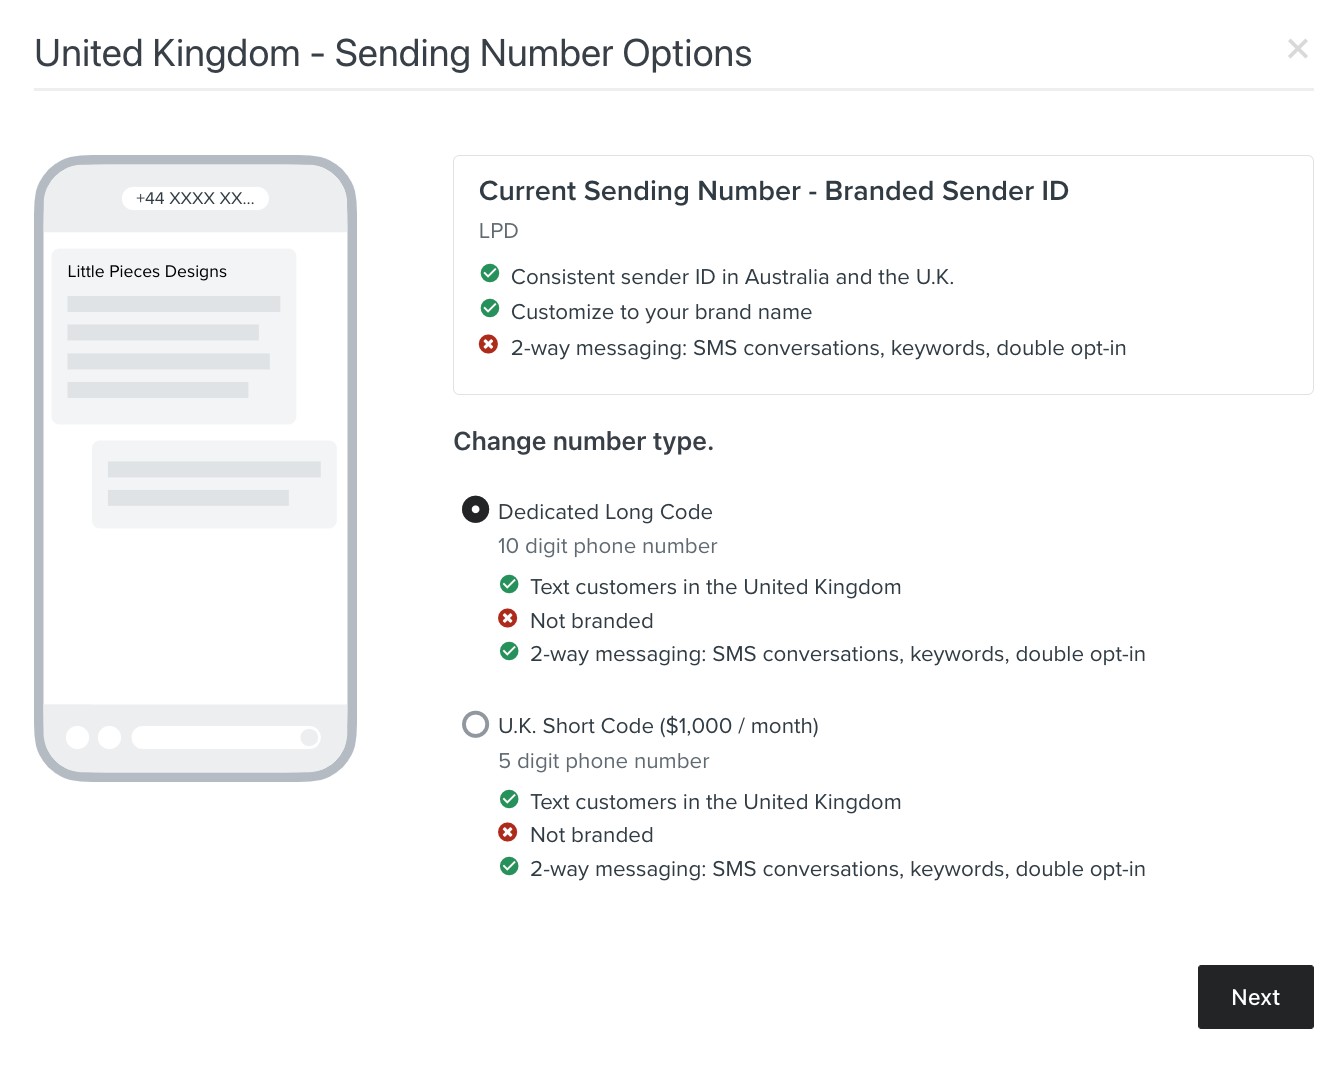 Modal to choose your UK SMS sending number